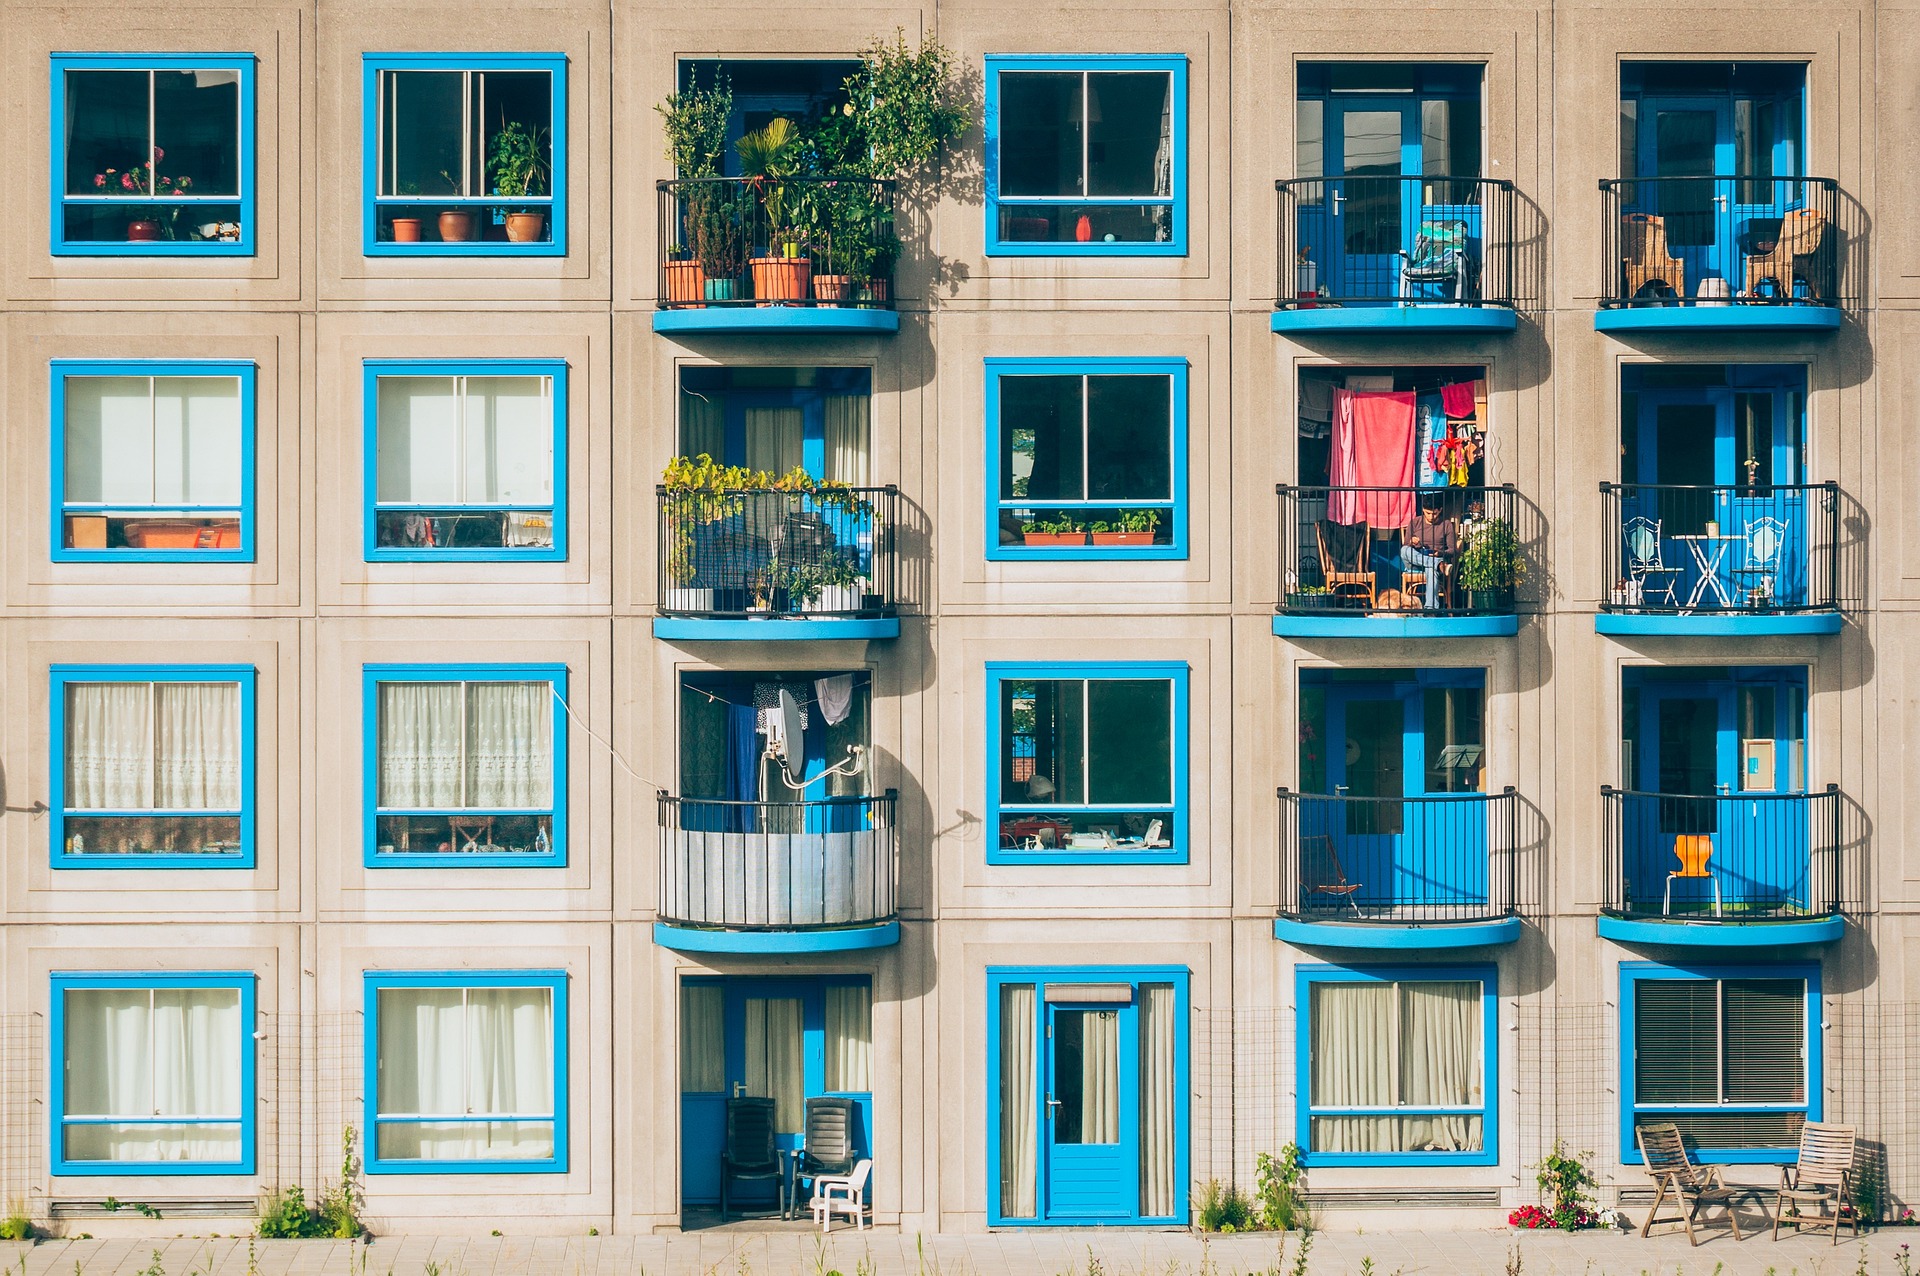 Image of apartment building with blue trim and plants